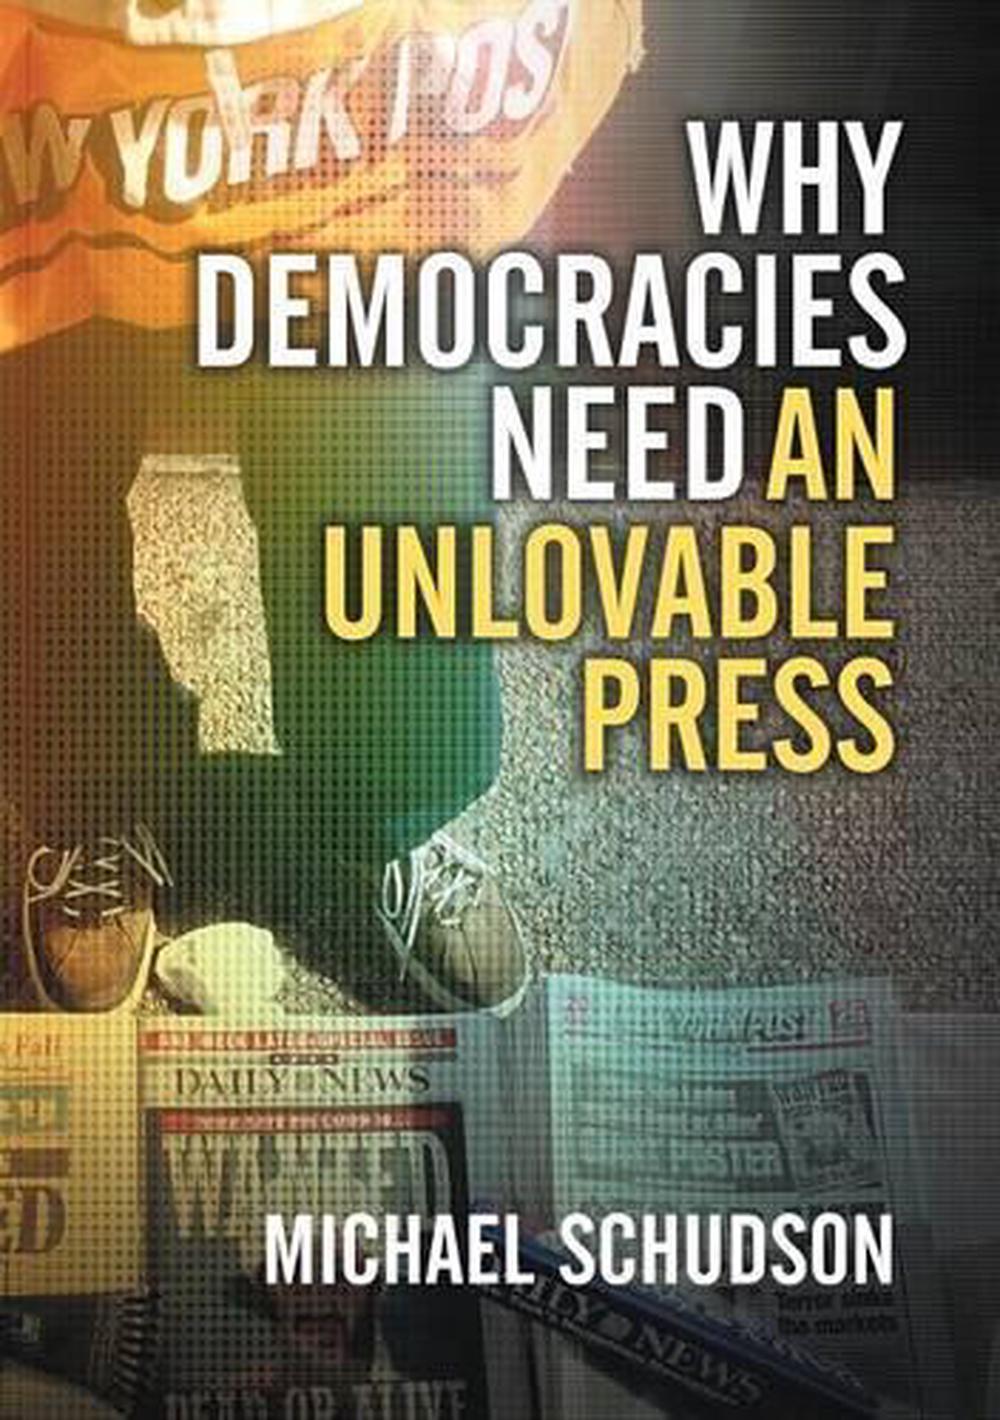 Why Democracies Need an Unlovable Press by Michael Schudson (English